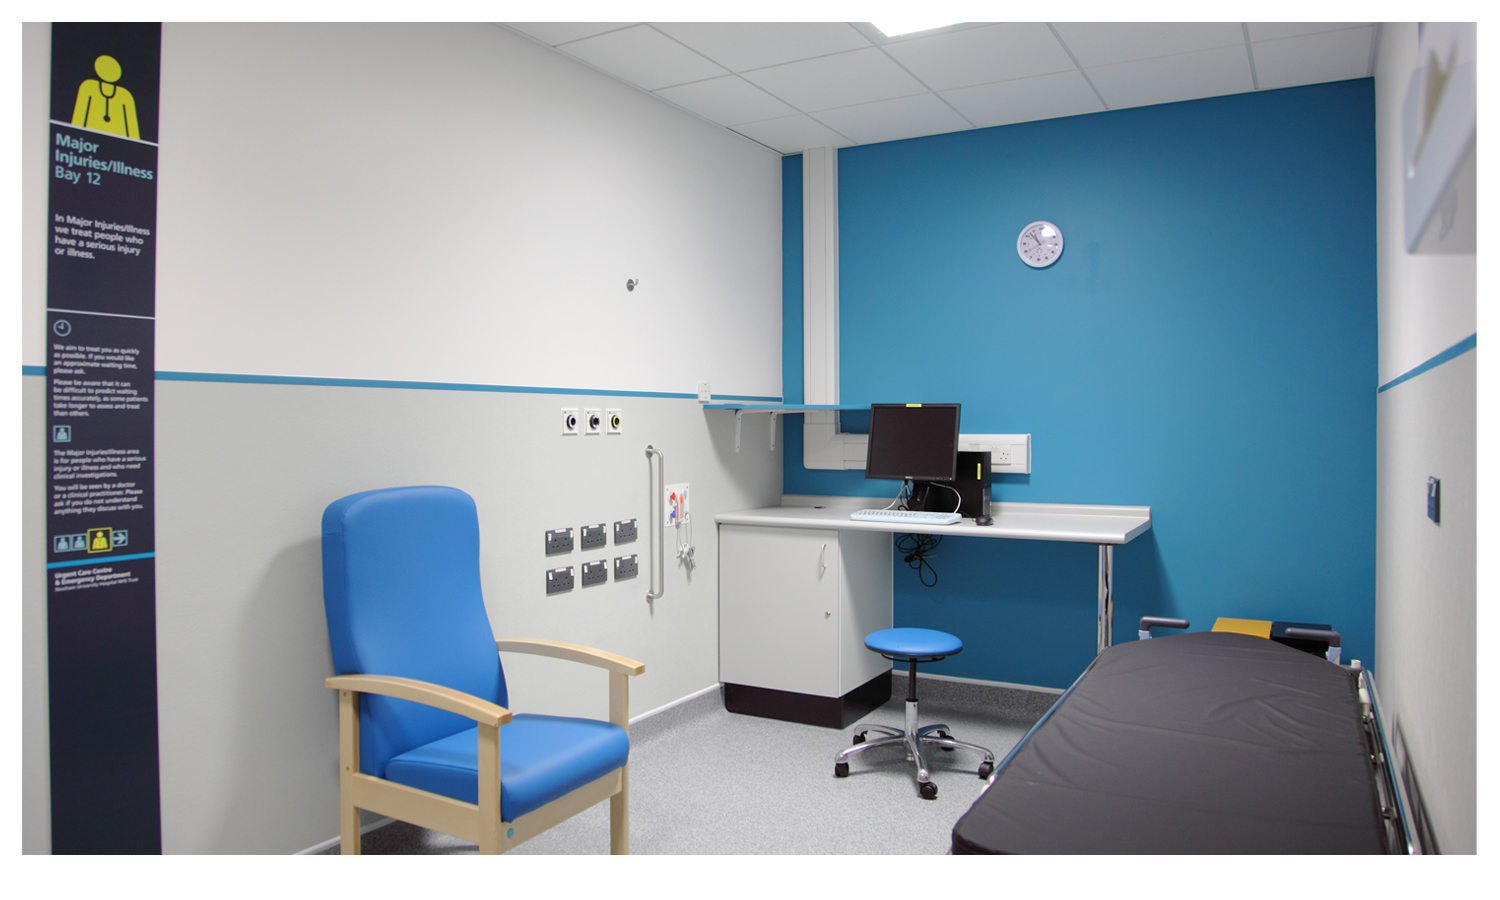  Panels inform patients where they are and what type of care they can expect.&nbsp;©Simon Turner Photography 